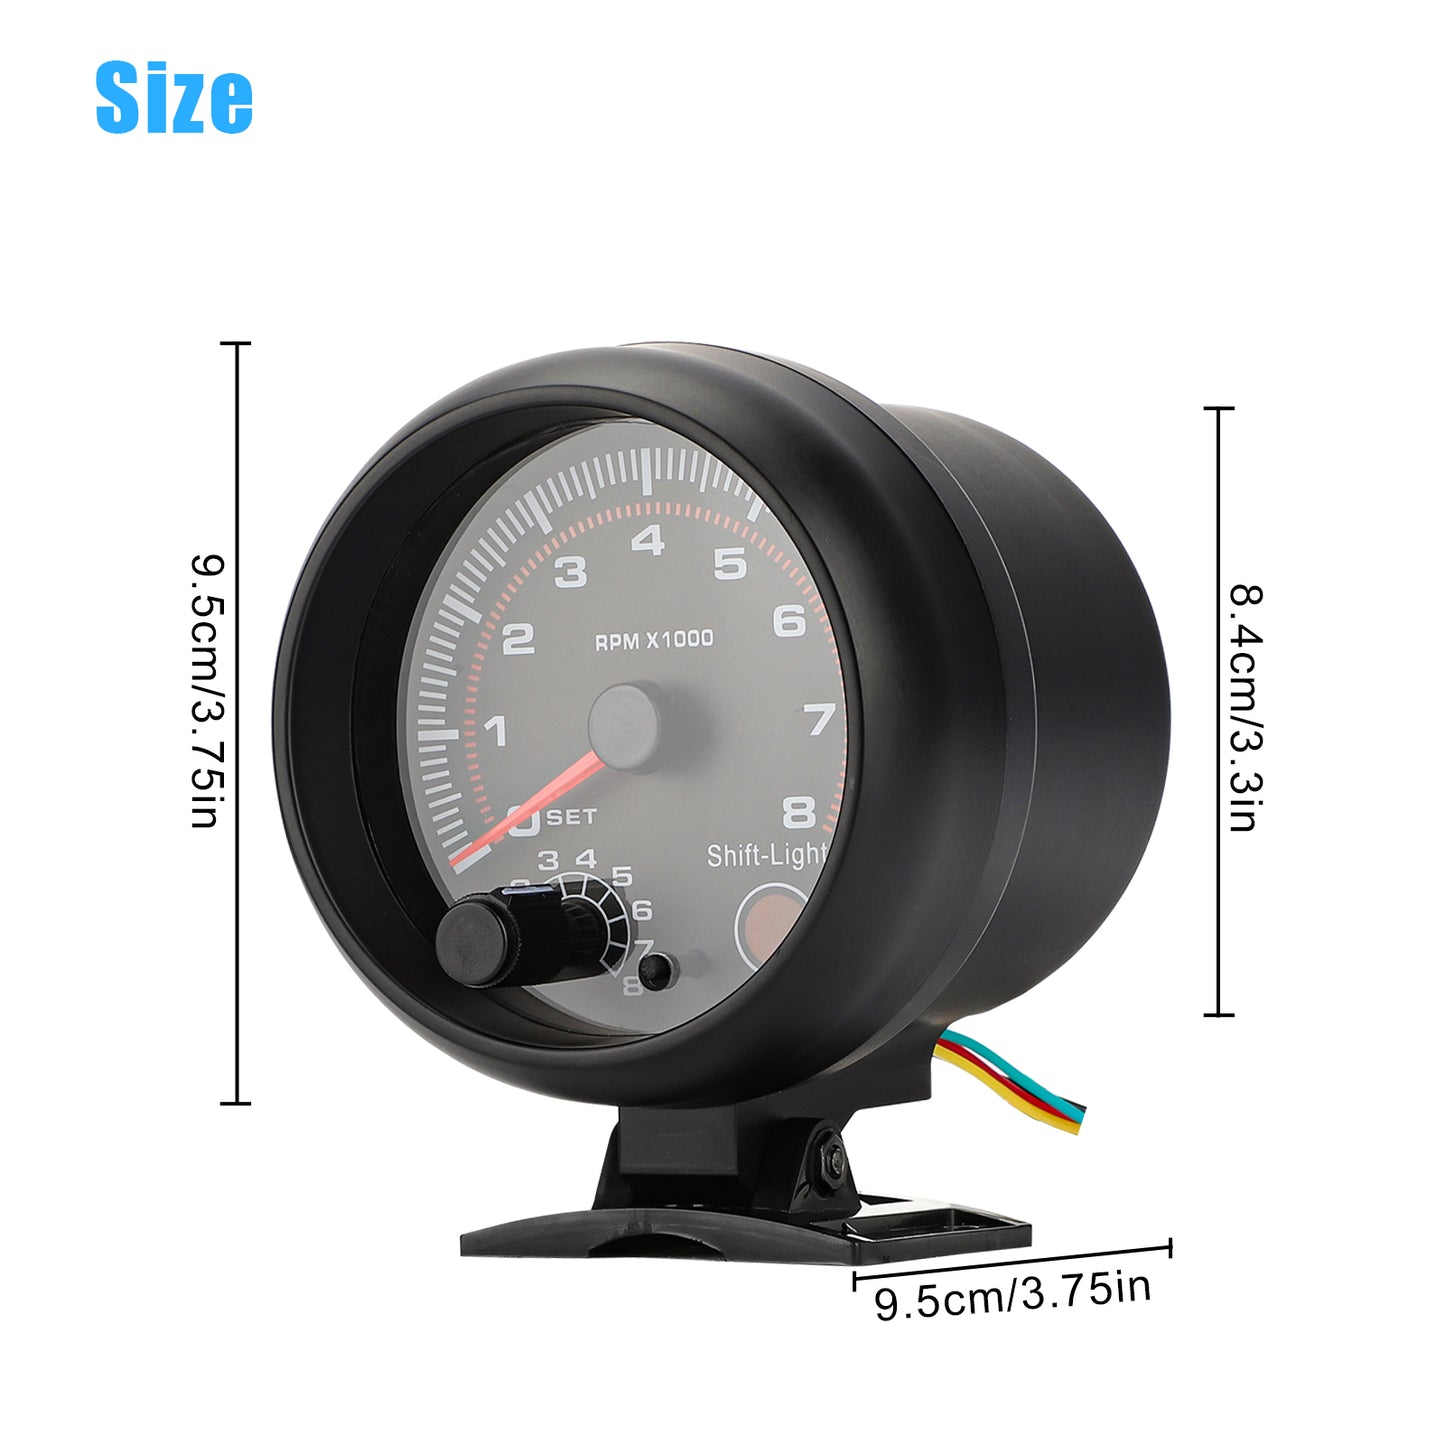 Versatile Car Tachometer Gauge - Accurate RPM Measurement with Backlight and Shift Light